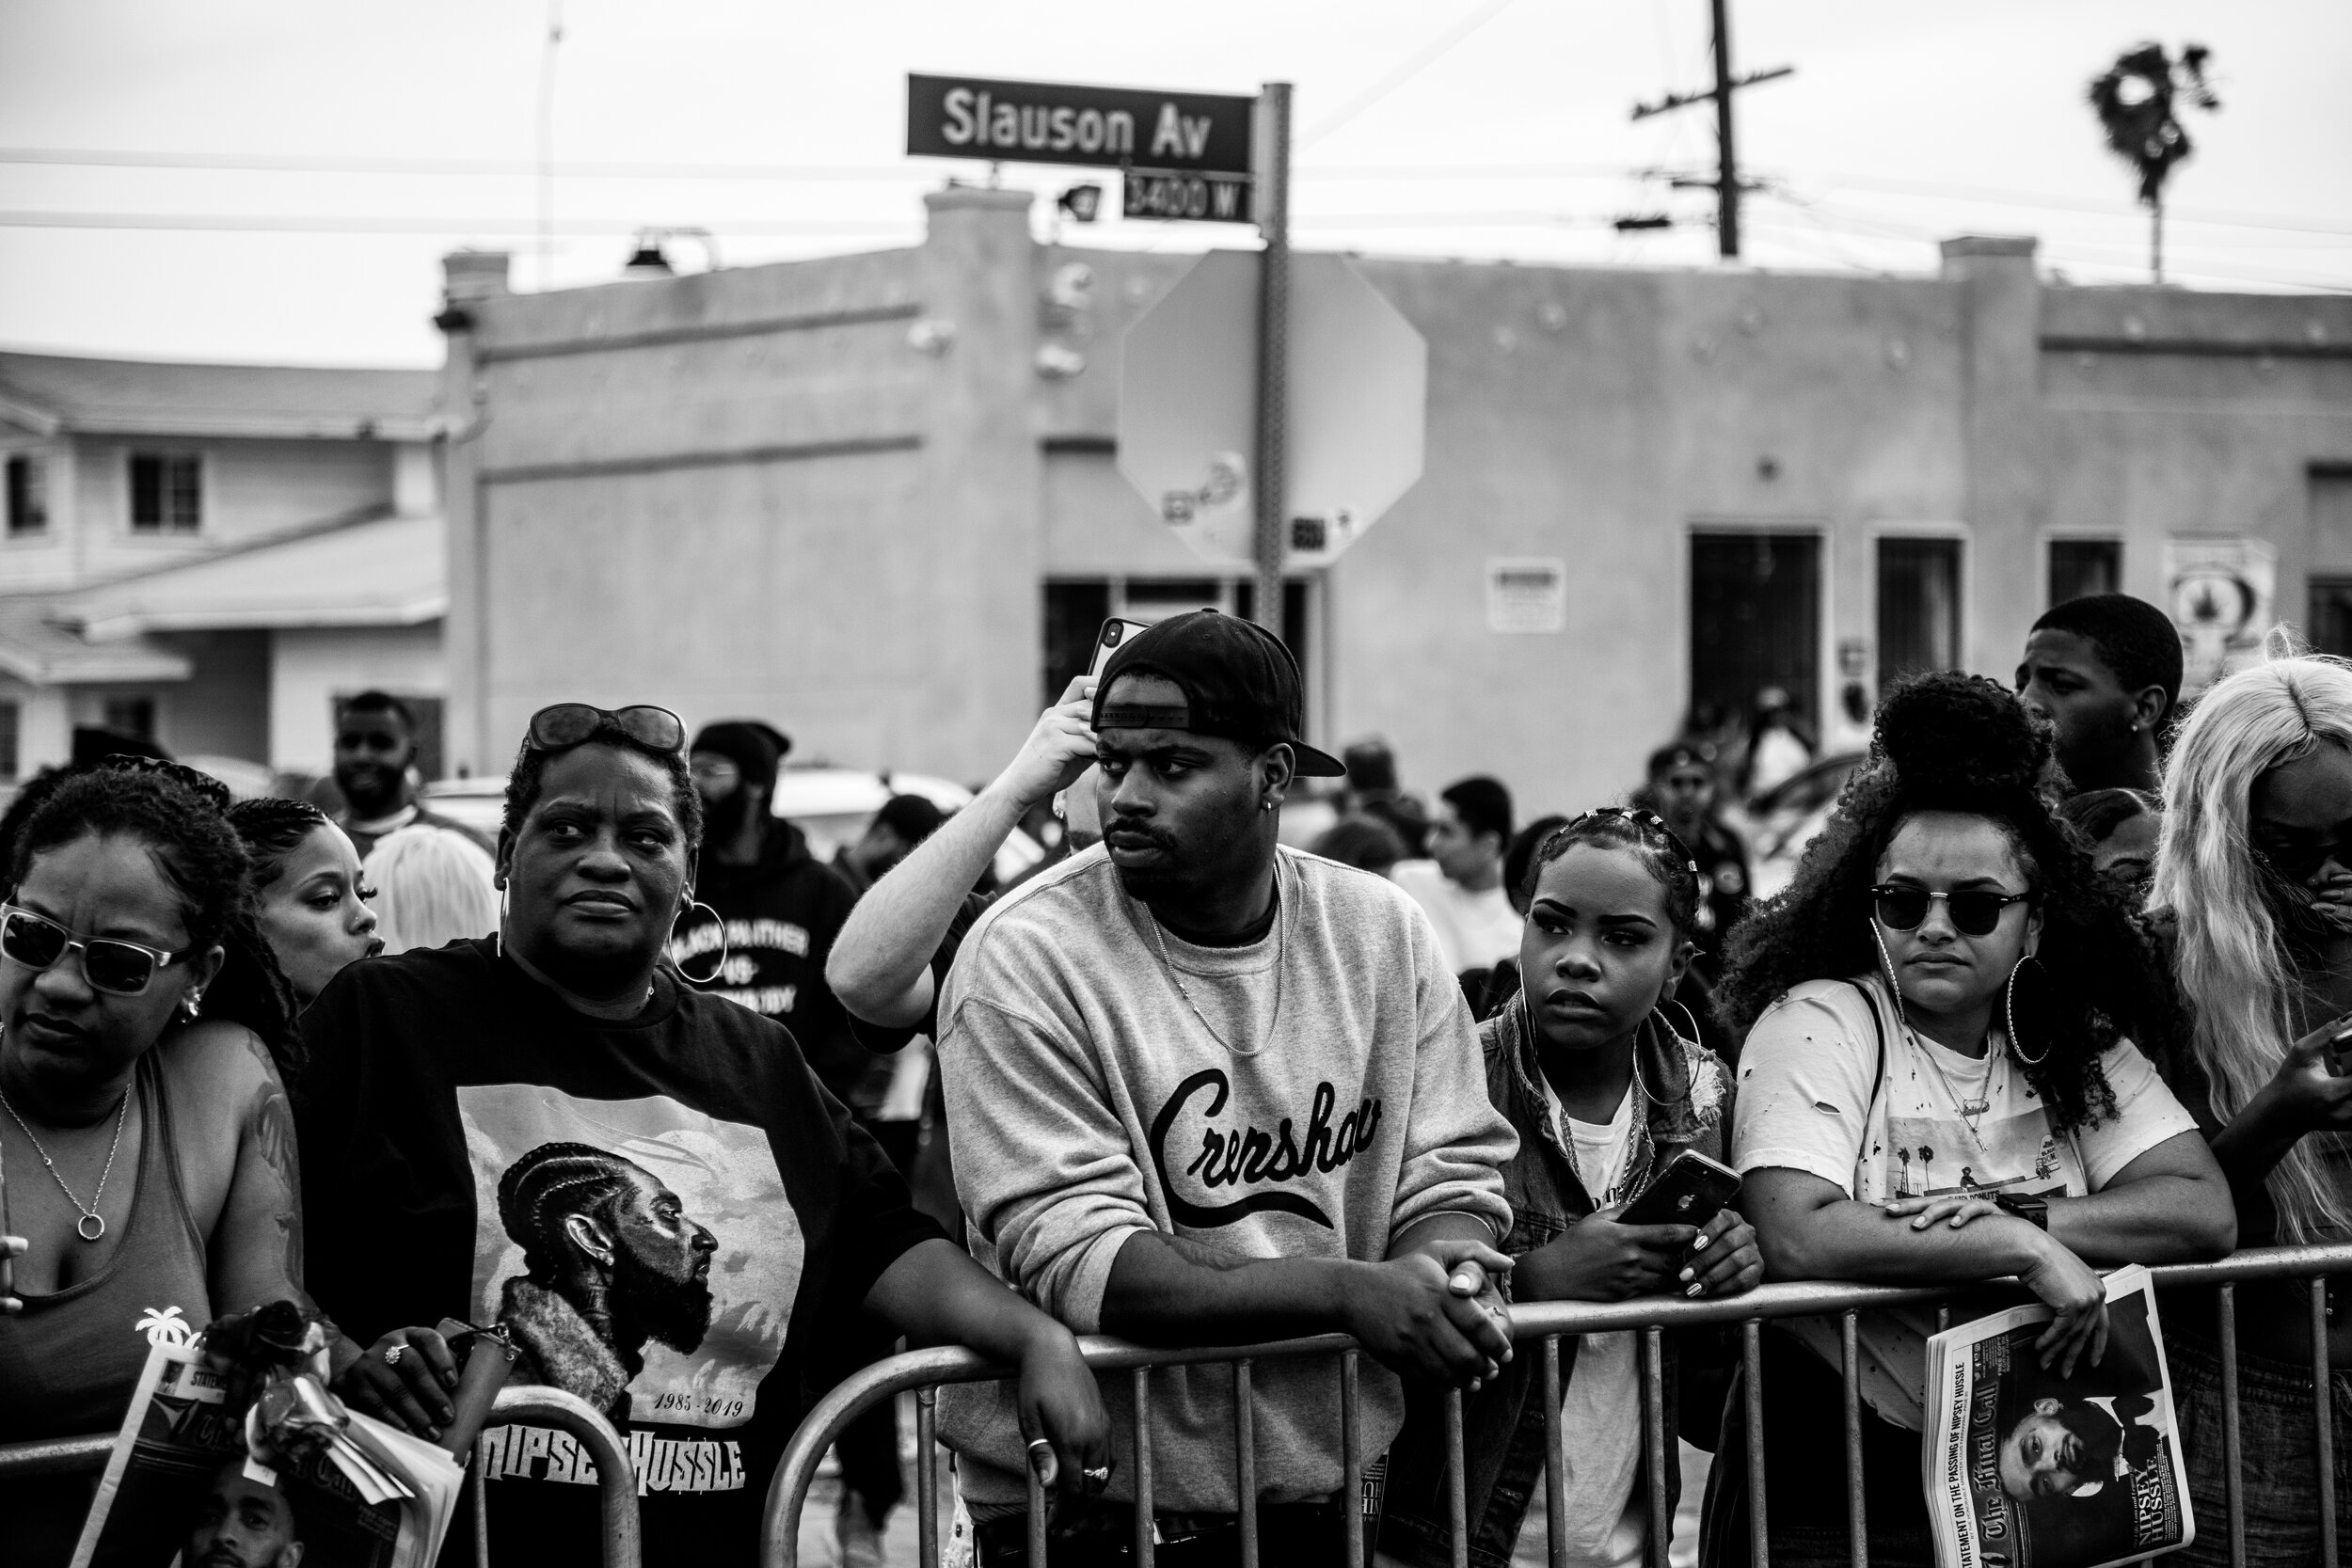  Photos from the Nipsey Hussle funeral procession on April 11, 2019.  